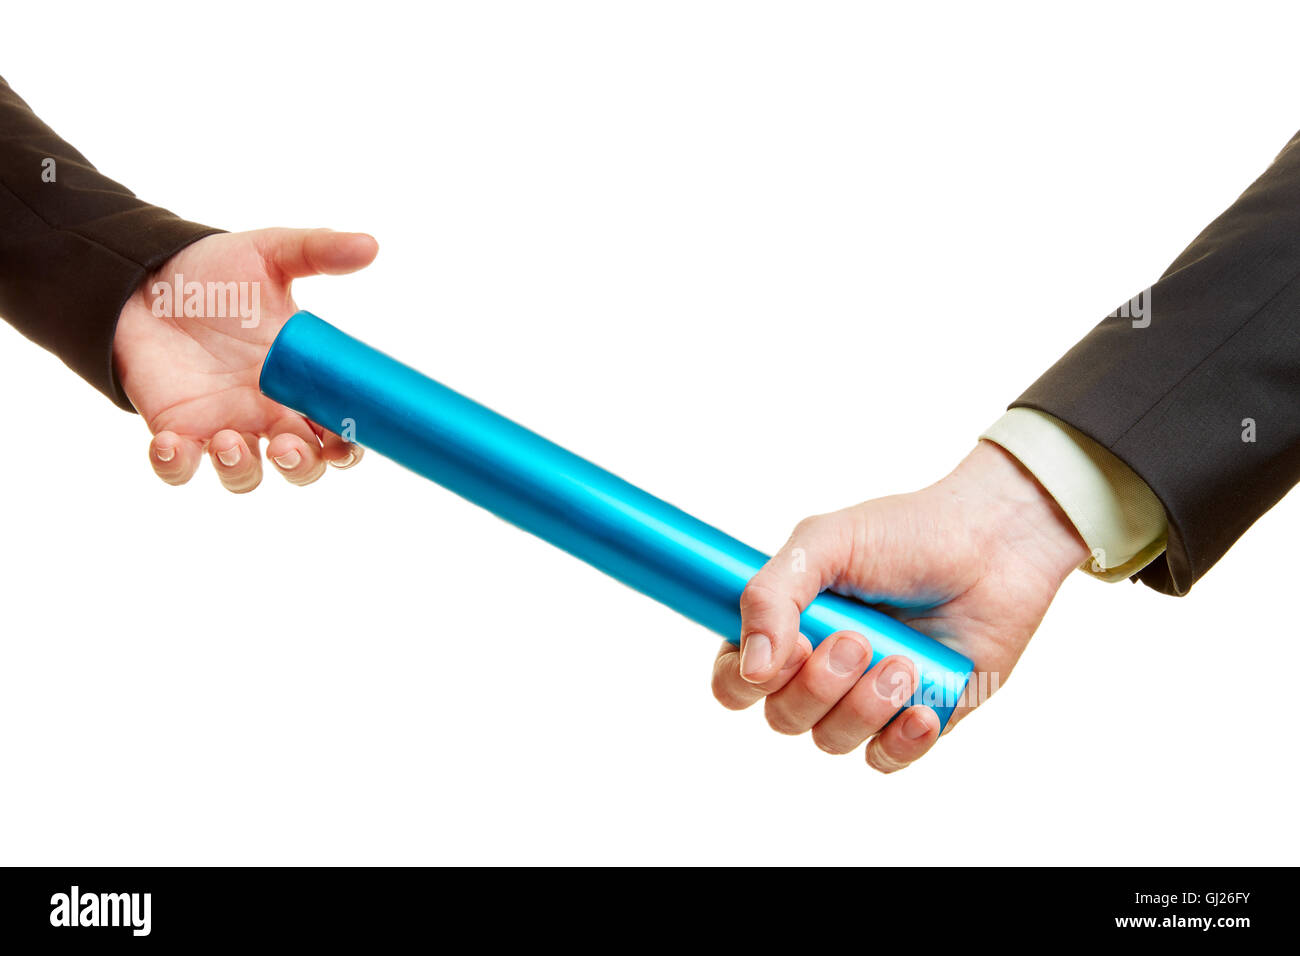 Team work concept with baton and two hands passing it by Stock Photo